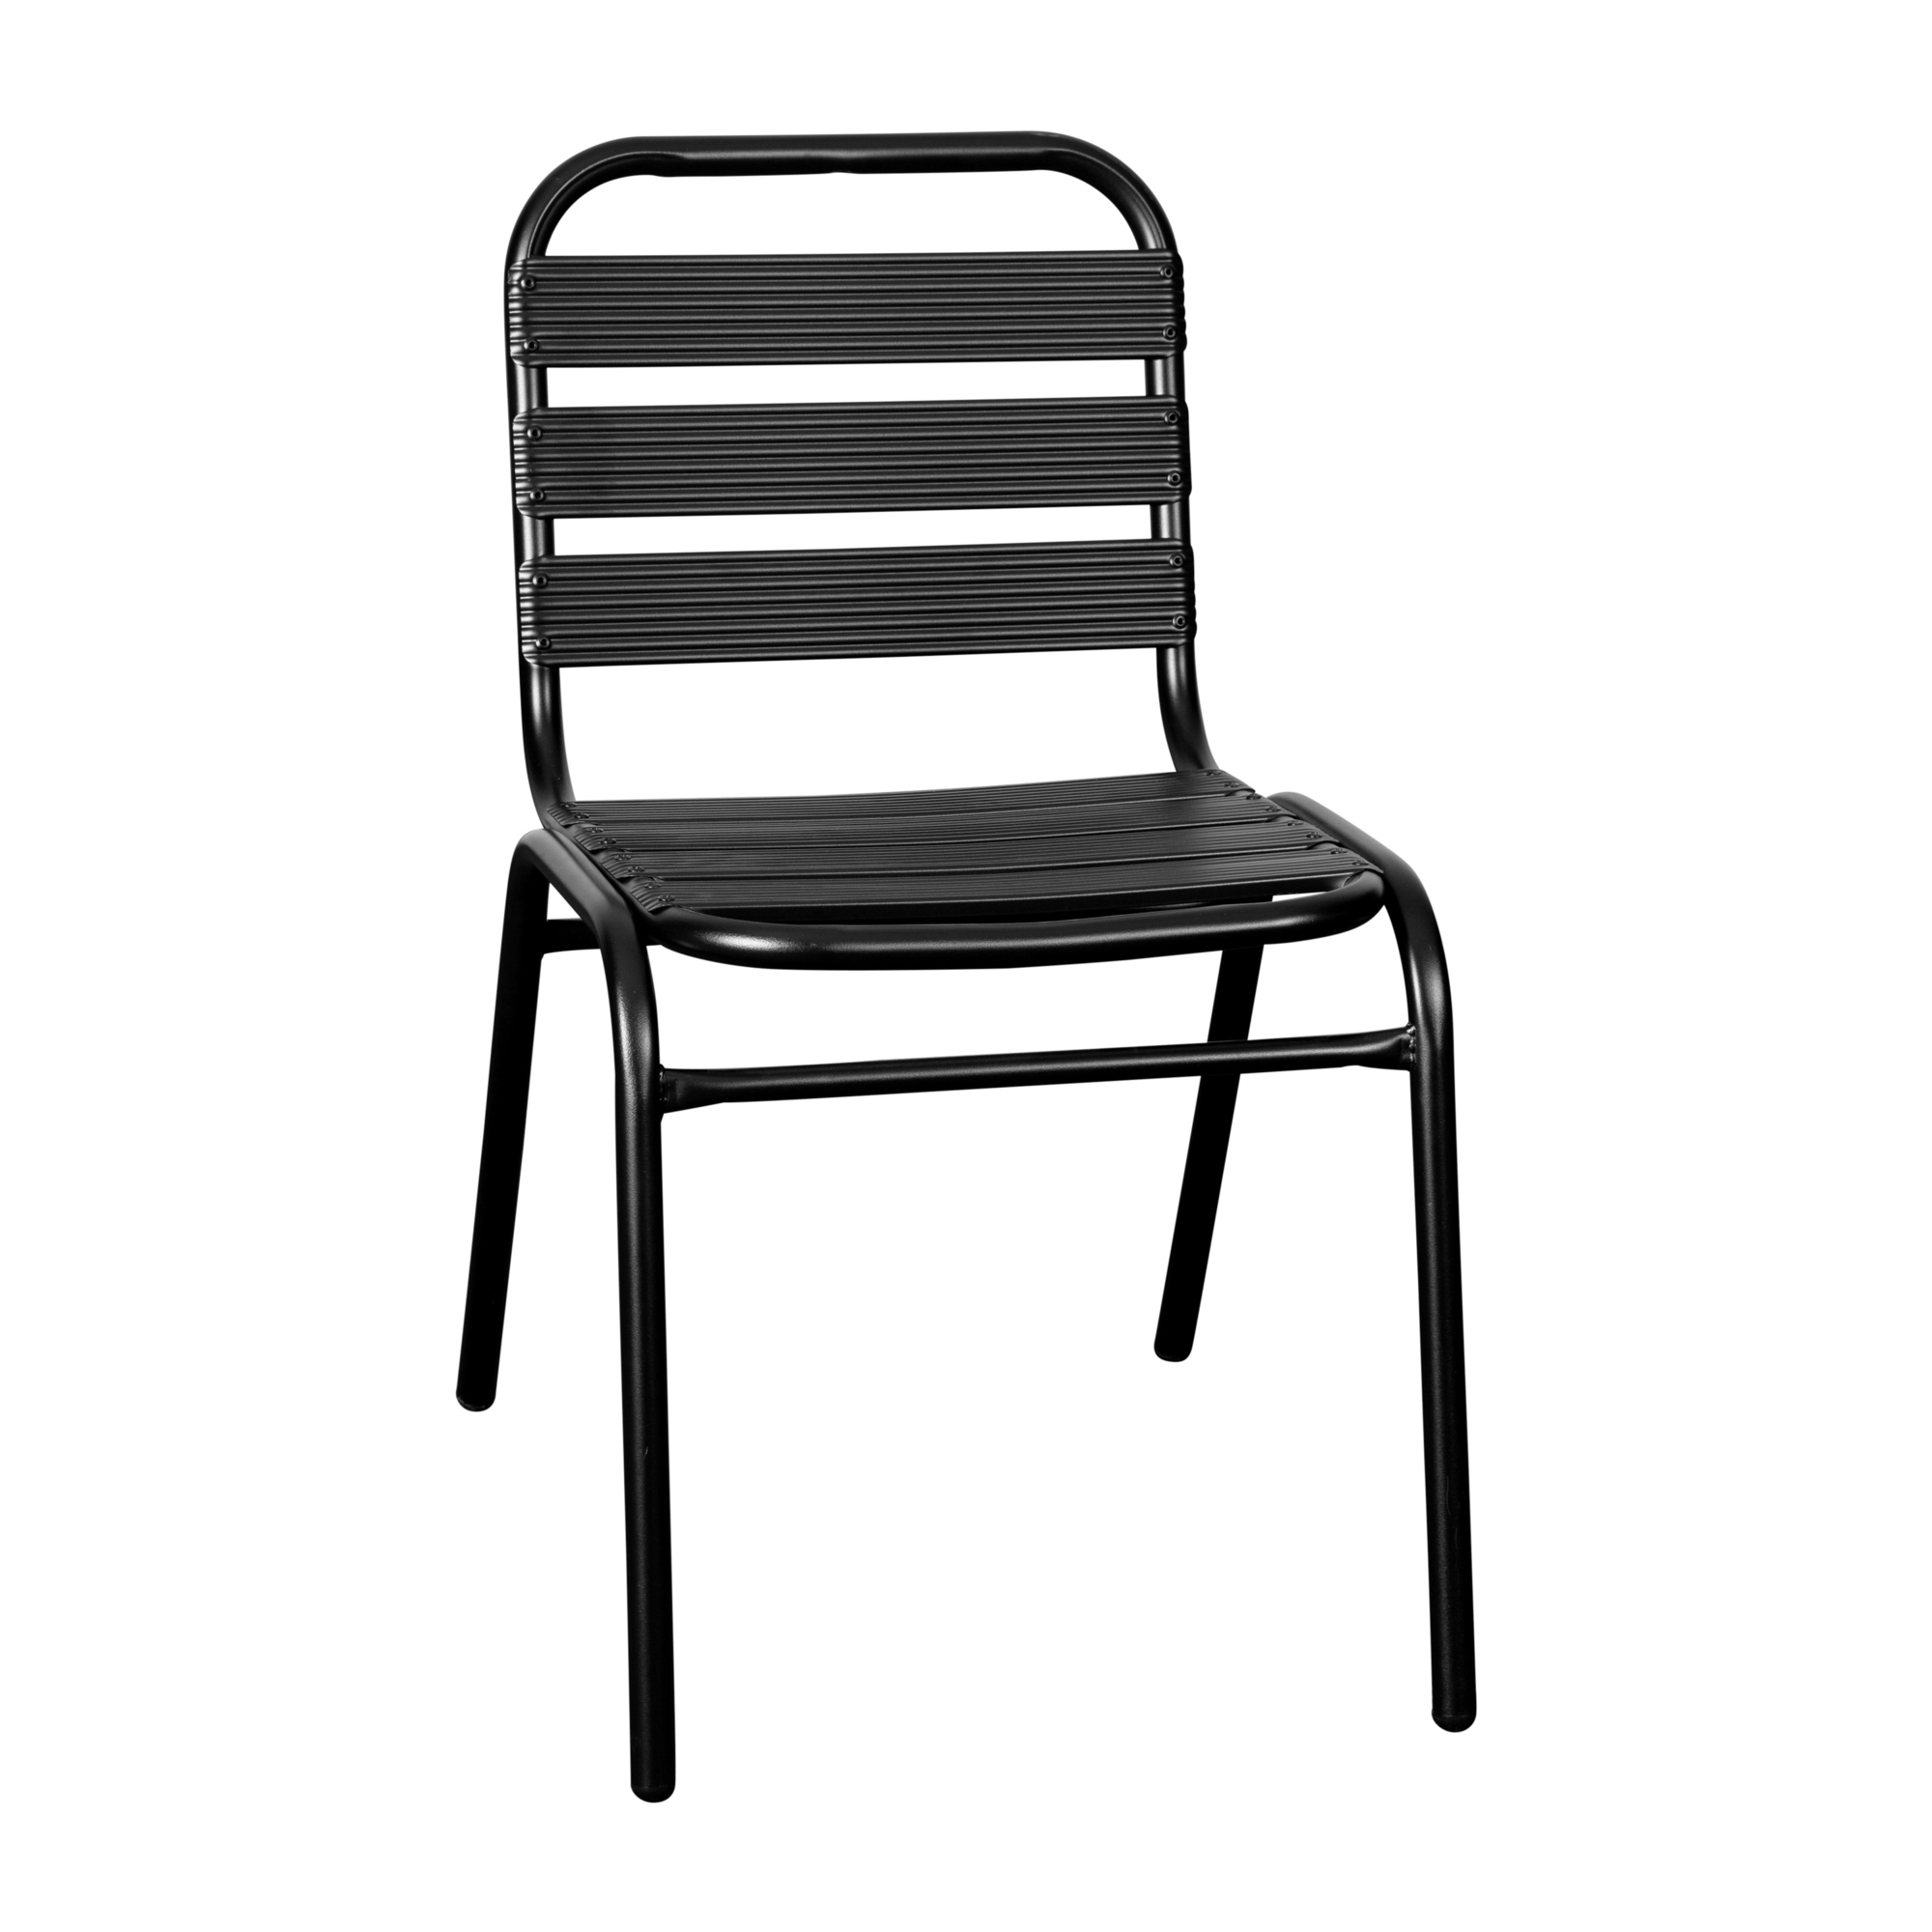 Flash Furniture, Commercial Black Restaurant Stack Chair, Primary Color Black, Material Aluminum, Width 19.5 in, Model TLH015CBK